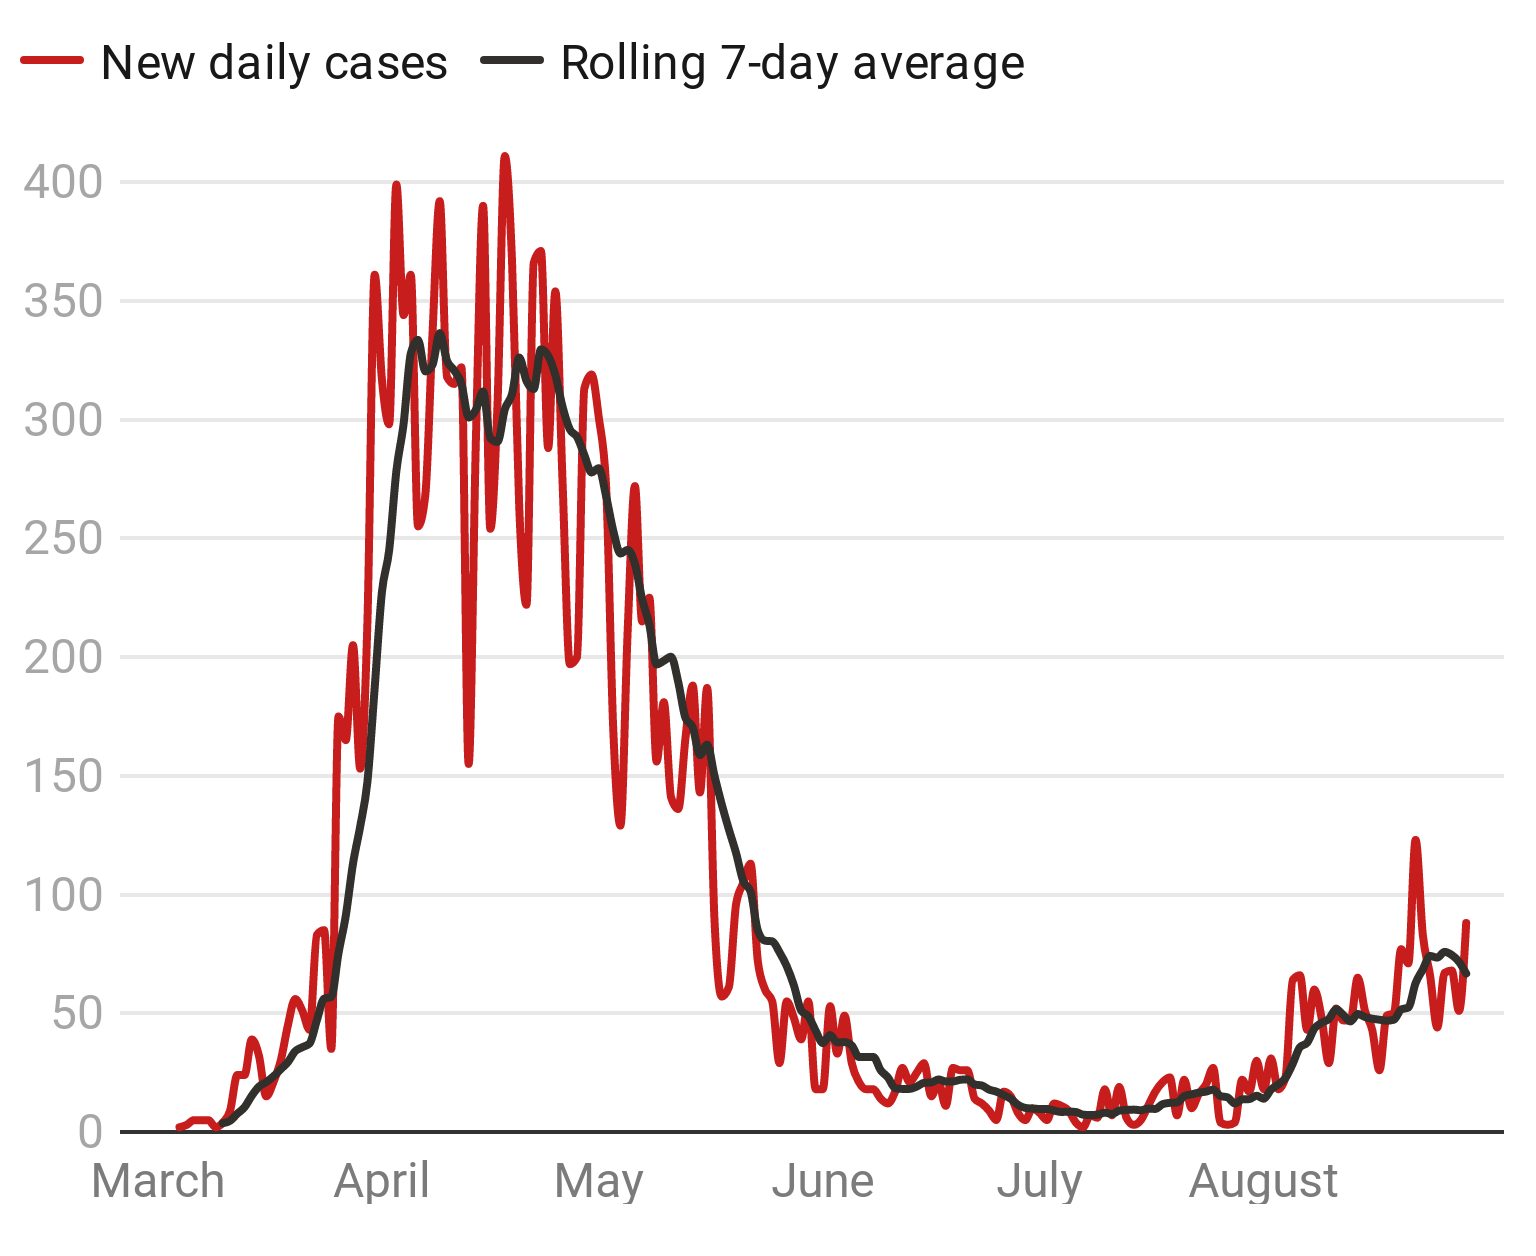 Clear rise in cases over August. (Source: Health Protection Scotland - Chart: STV News)